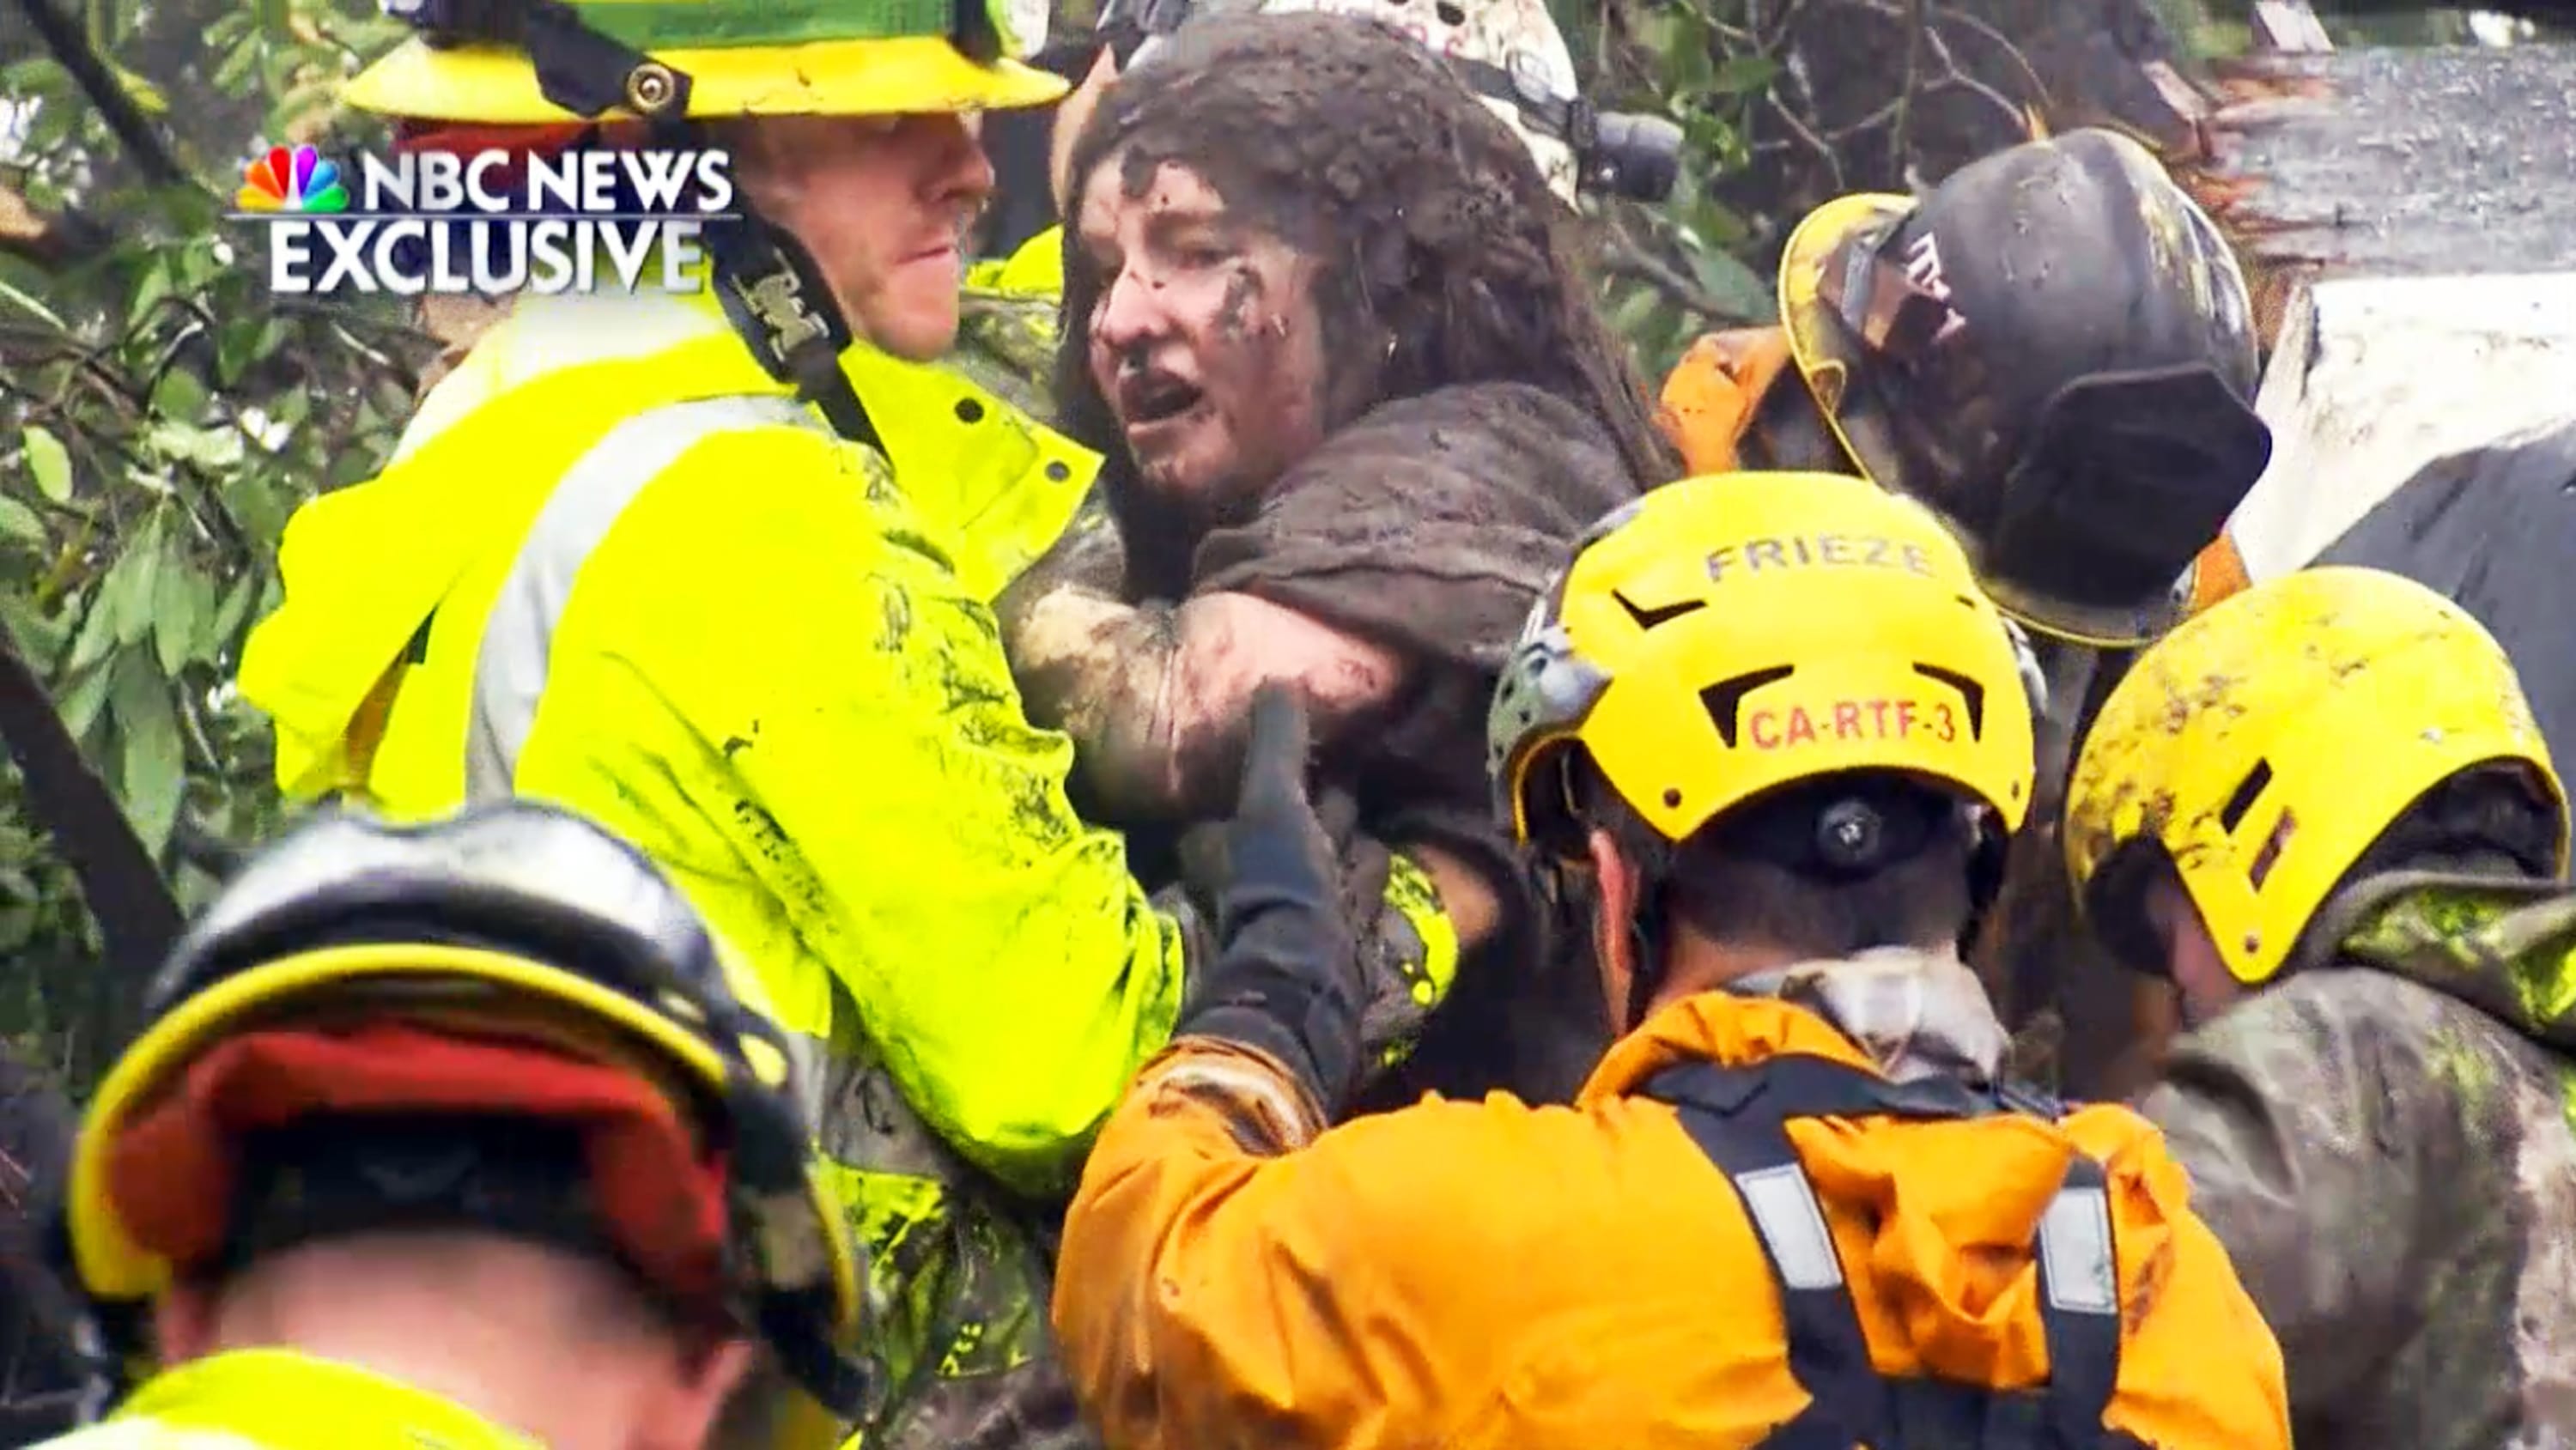 This frame from video provided by NBC News shows the rescue of a 14-year-old girl from the wreckage of a home after heavy rains trapped dozens of people in Montecito, Calif., Tuesday, Jan. 9, 2018. The girl's name was not immediately available. Several homes were swept away before dawn Tuesday when mud and debris roared into neighborhoods in Montecito from hillsides stripped of vegetation during the Thomas wildfire.